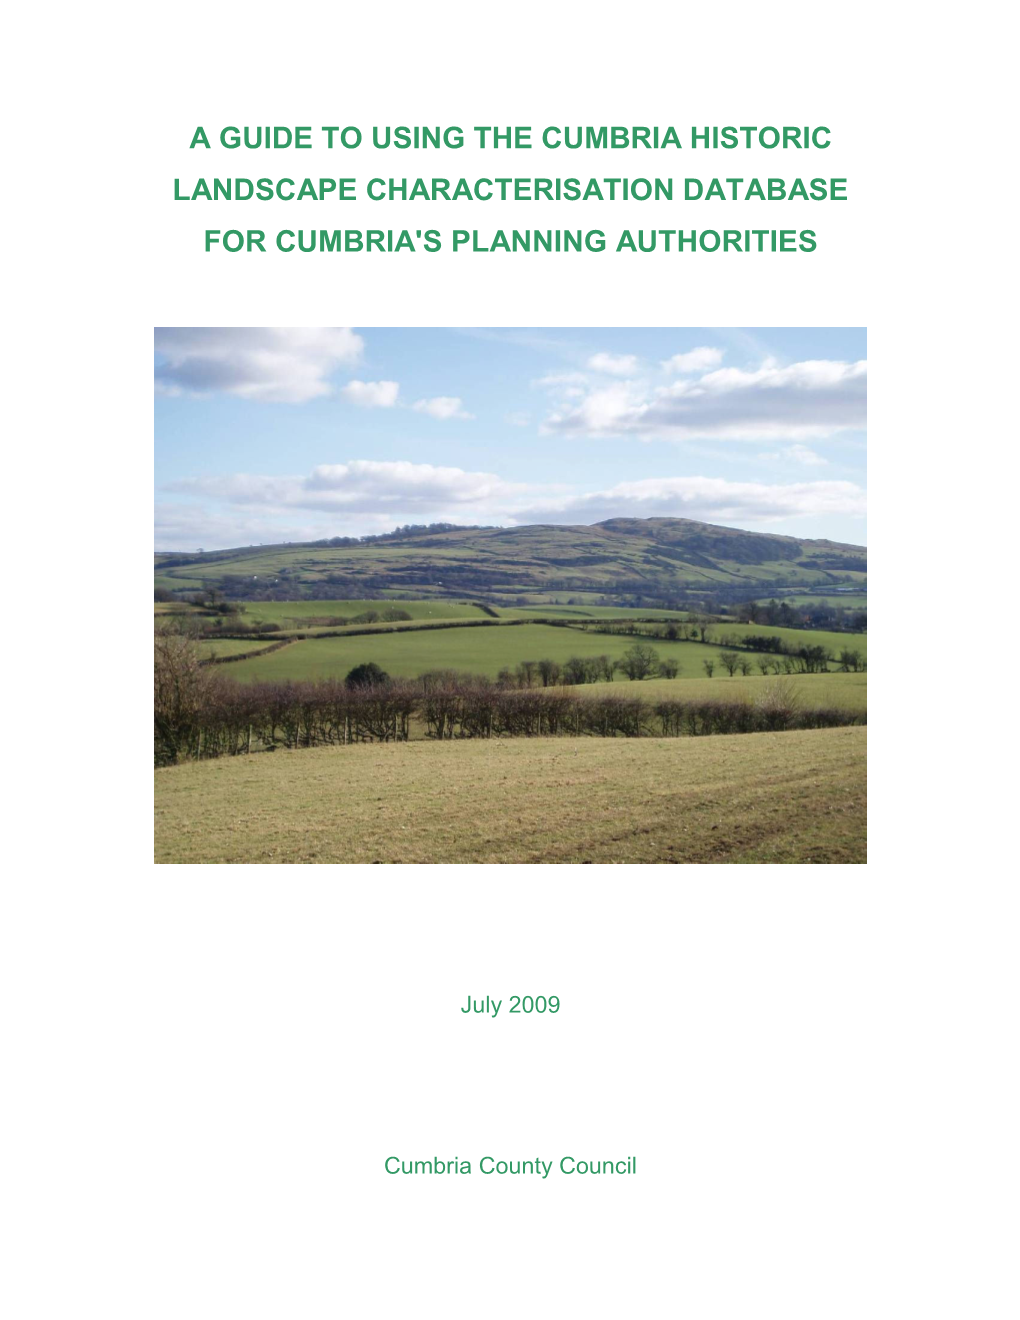 A Guide to Using the Cumbria Historic Landscape Characterisation Database for Cumbria's Planning Authorities